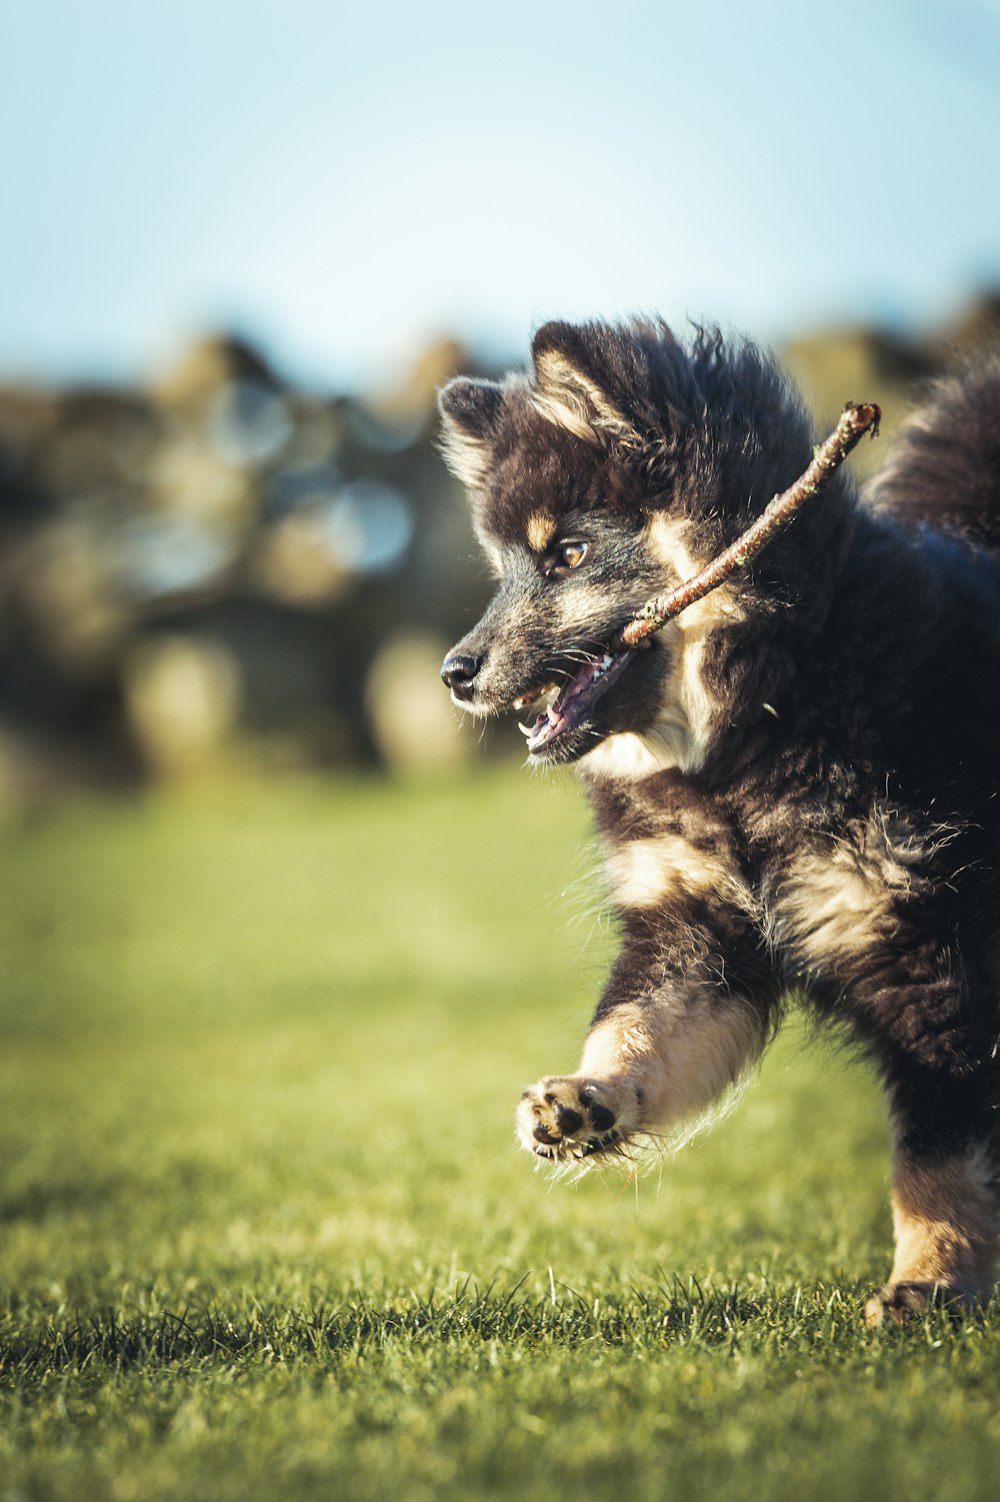 a small black and brown dog running across a lush green field